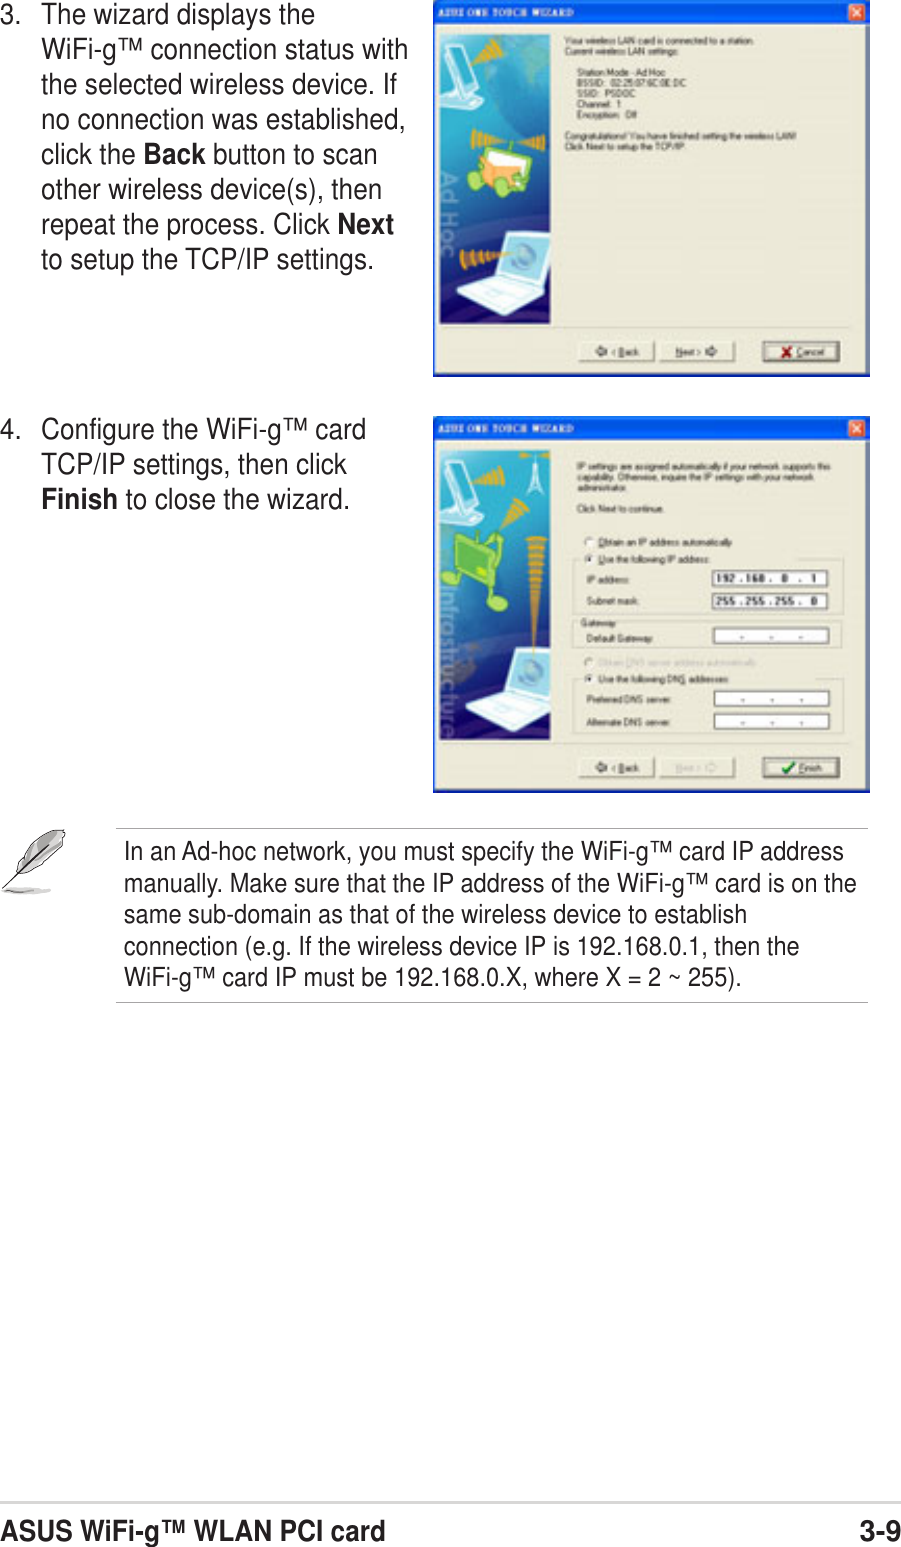 ASUS WiFi-g™ WLAN PCI card3-94. Configure the WiFi-g™ cardTCP/IP settings, then clickFinish to close the wizard.3. The wizard displays theWiFi-g™ connection status withthe selected wireless device. Ifno connection was established,click the Back button to scanother wireless device(s), thenrepeat the process. Click Nextto setup the TCP/IP settings.In an Ad-hoc network, you must specify the WiFi-g™ card IP addressmanually. Make sure that the IP address of the WiFi-g™ card is on thesame sub-domain as that of the wireless device to establishconnection (e.g. If the wireless device IP is 192.168.0.1, then theWiFi-g™ card IP must be 192.168.0.X, where X = 2 ~ 255).